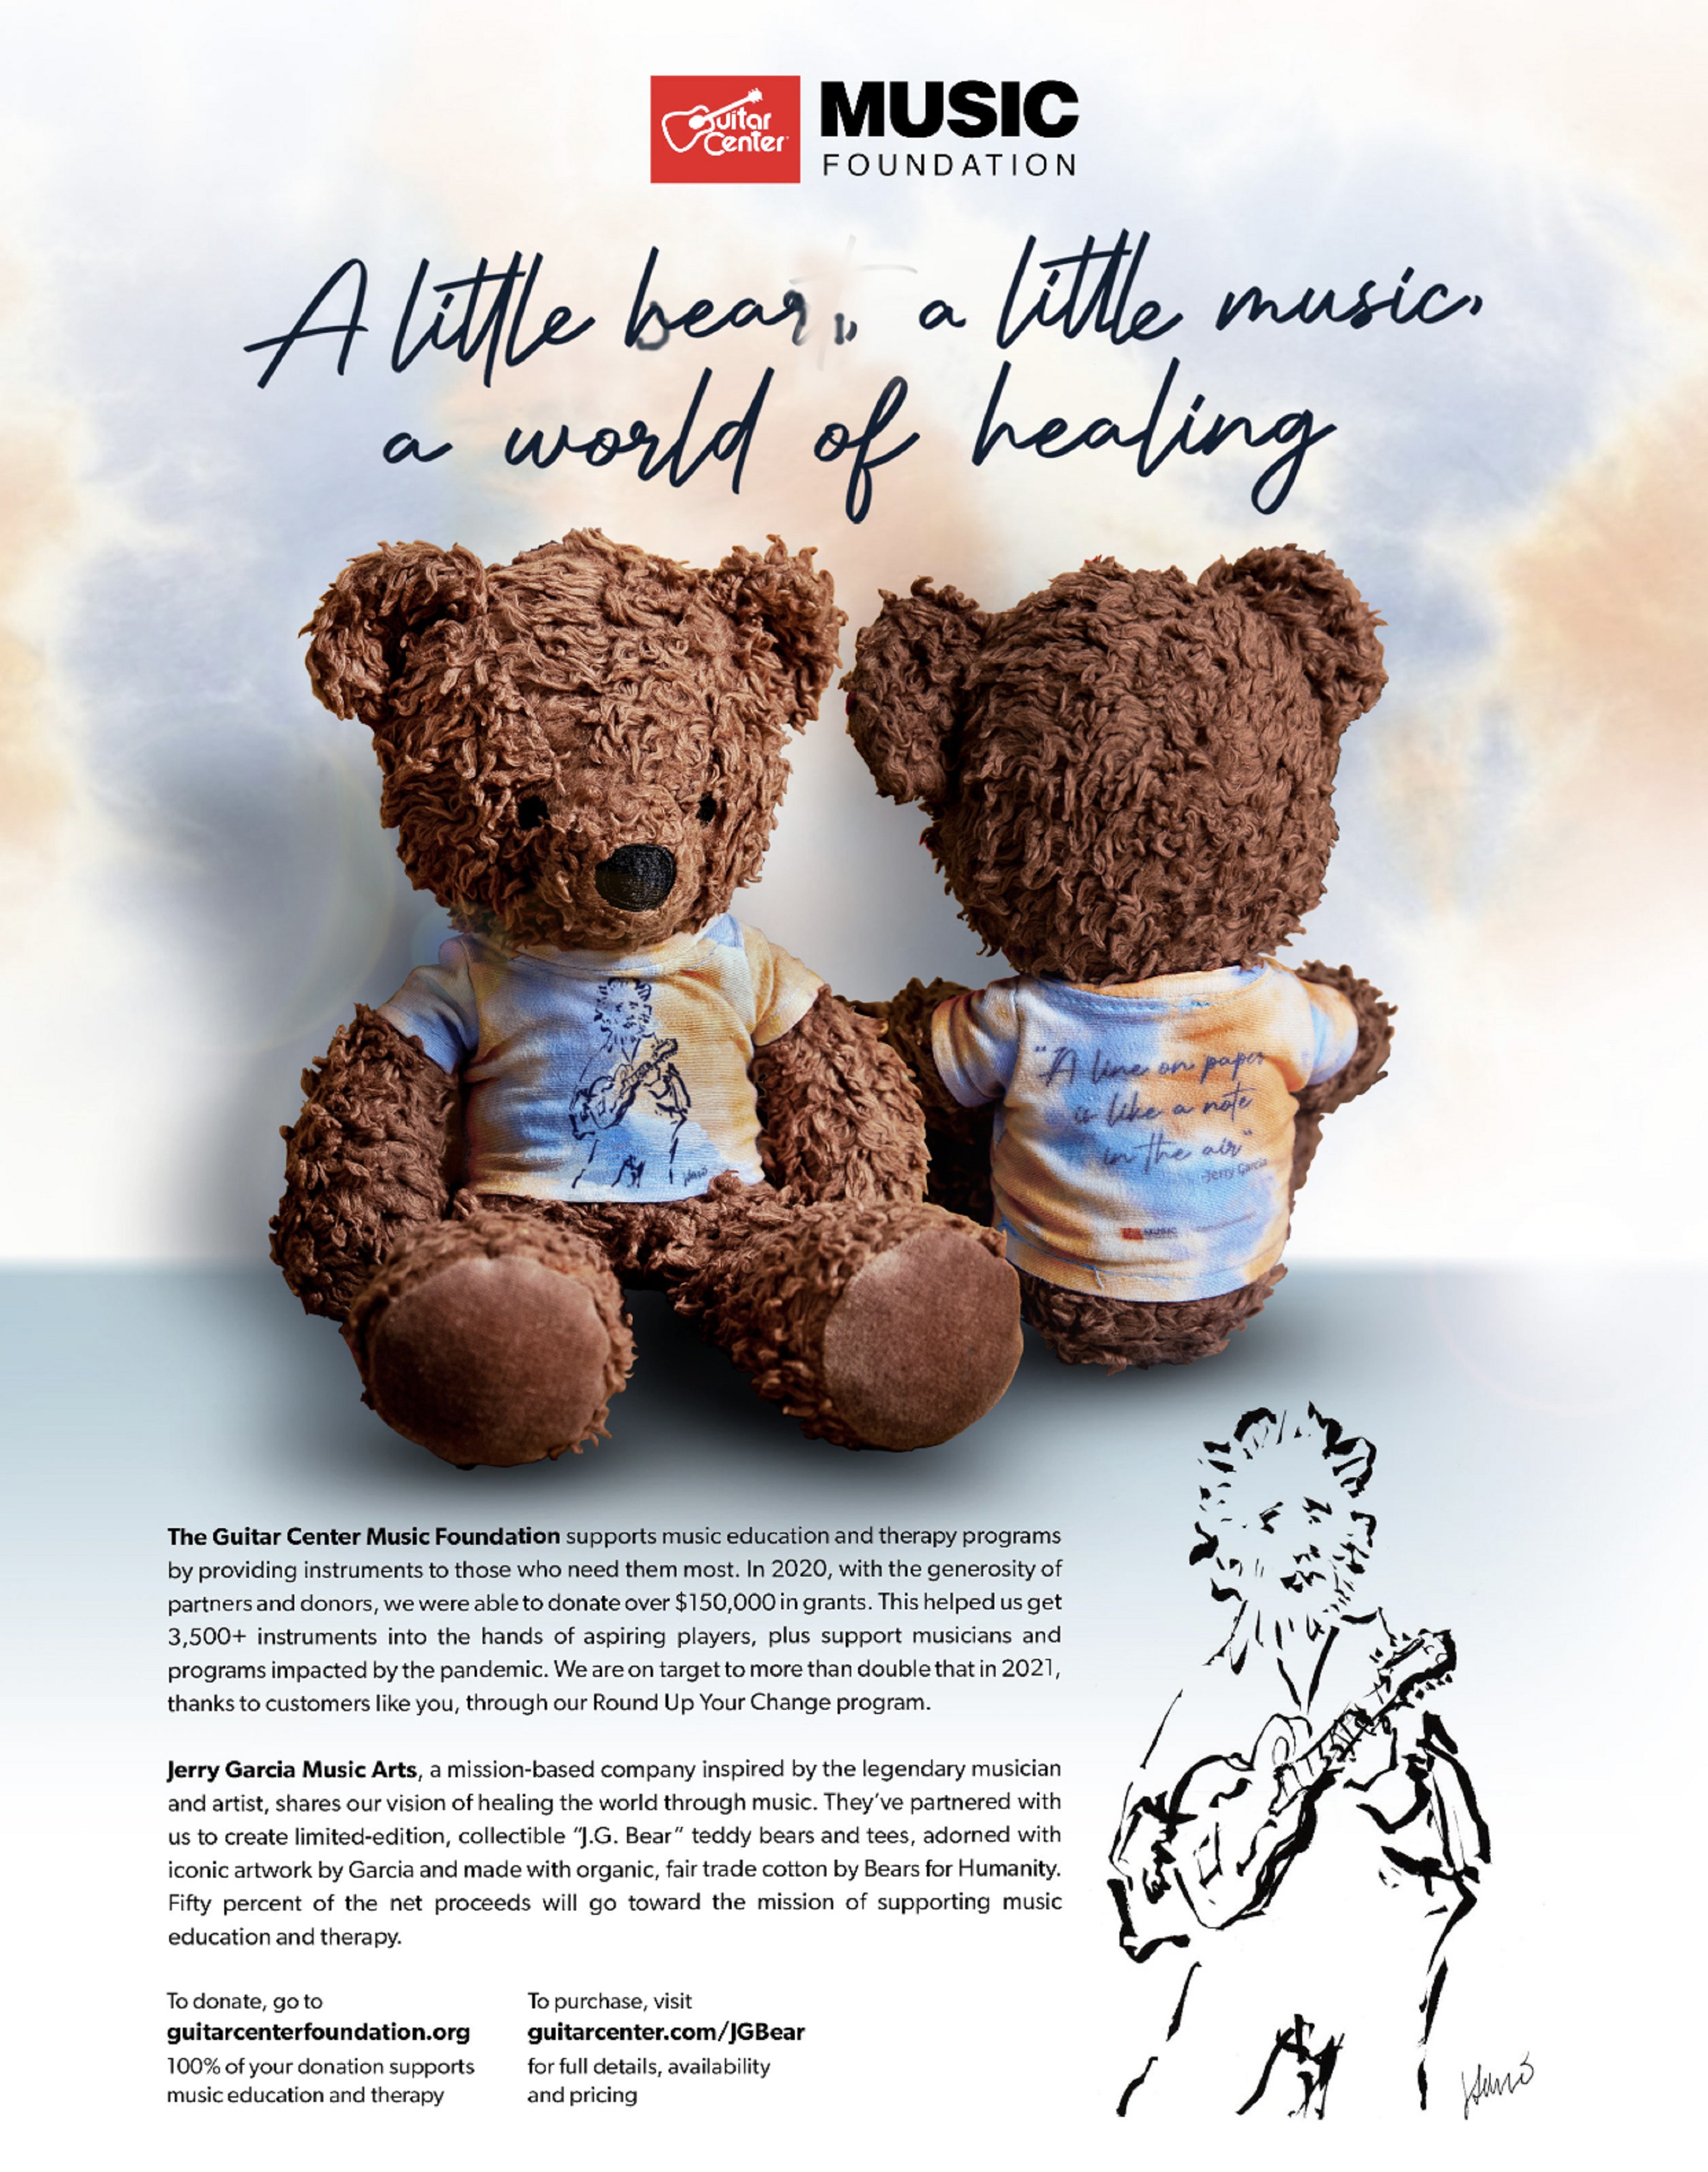  The Guitar Center Music Foundation collaborates with Jerry Garcia Music Arts on new JG Bear Collectible Items to Raise Funds for Arts and Music Education